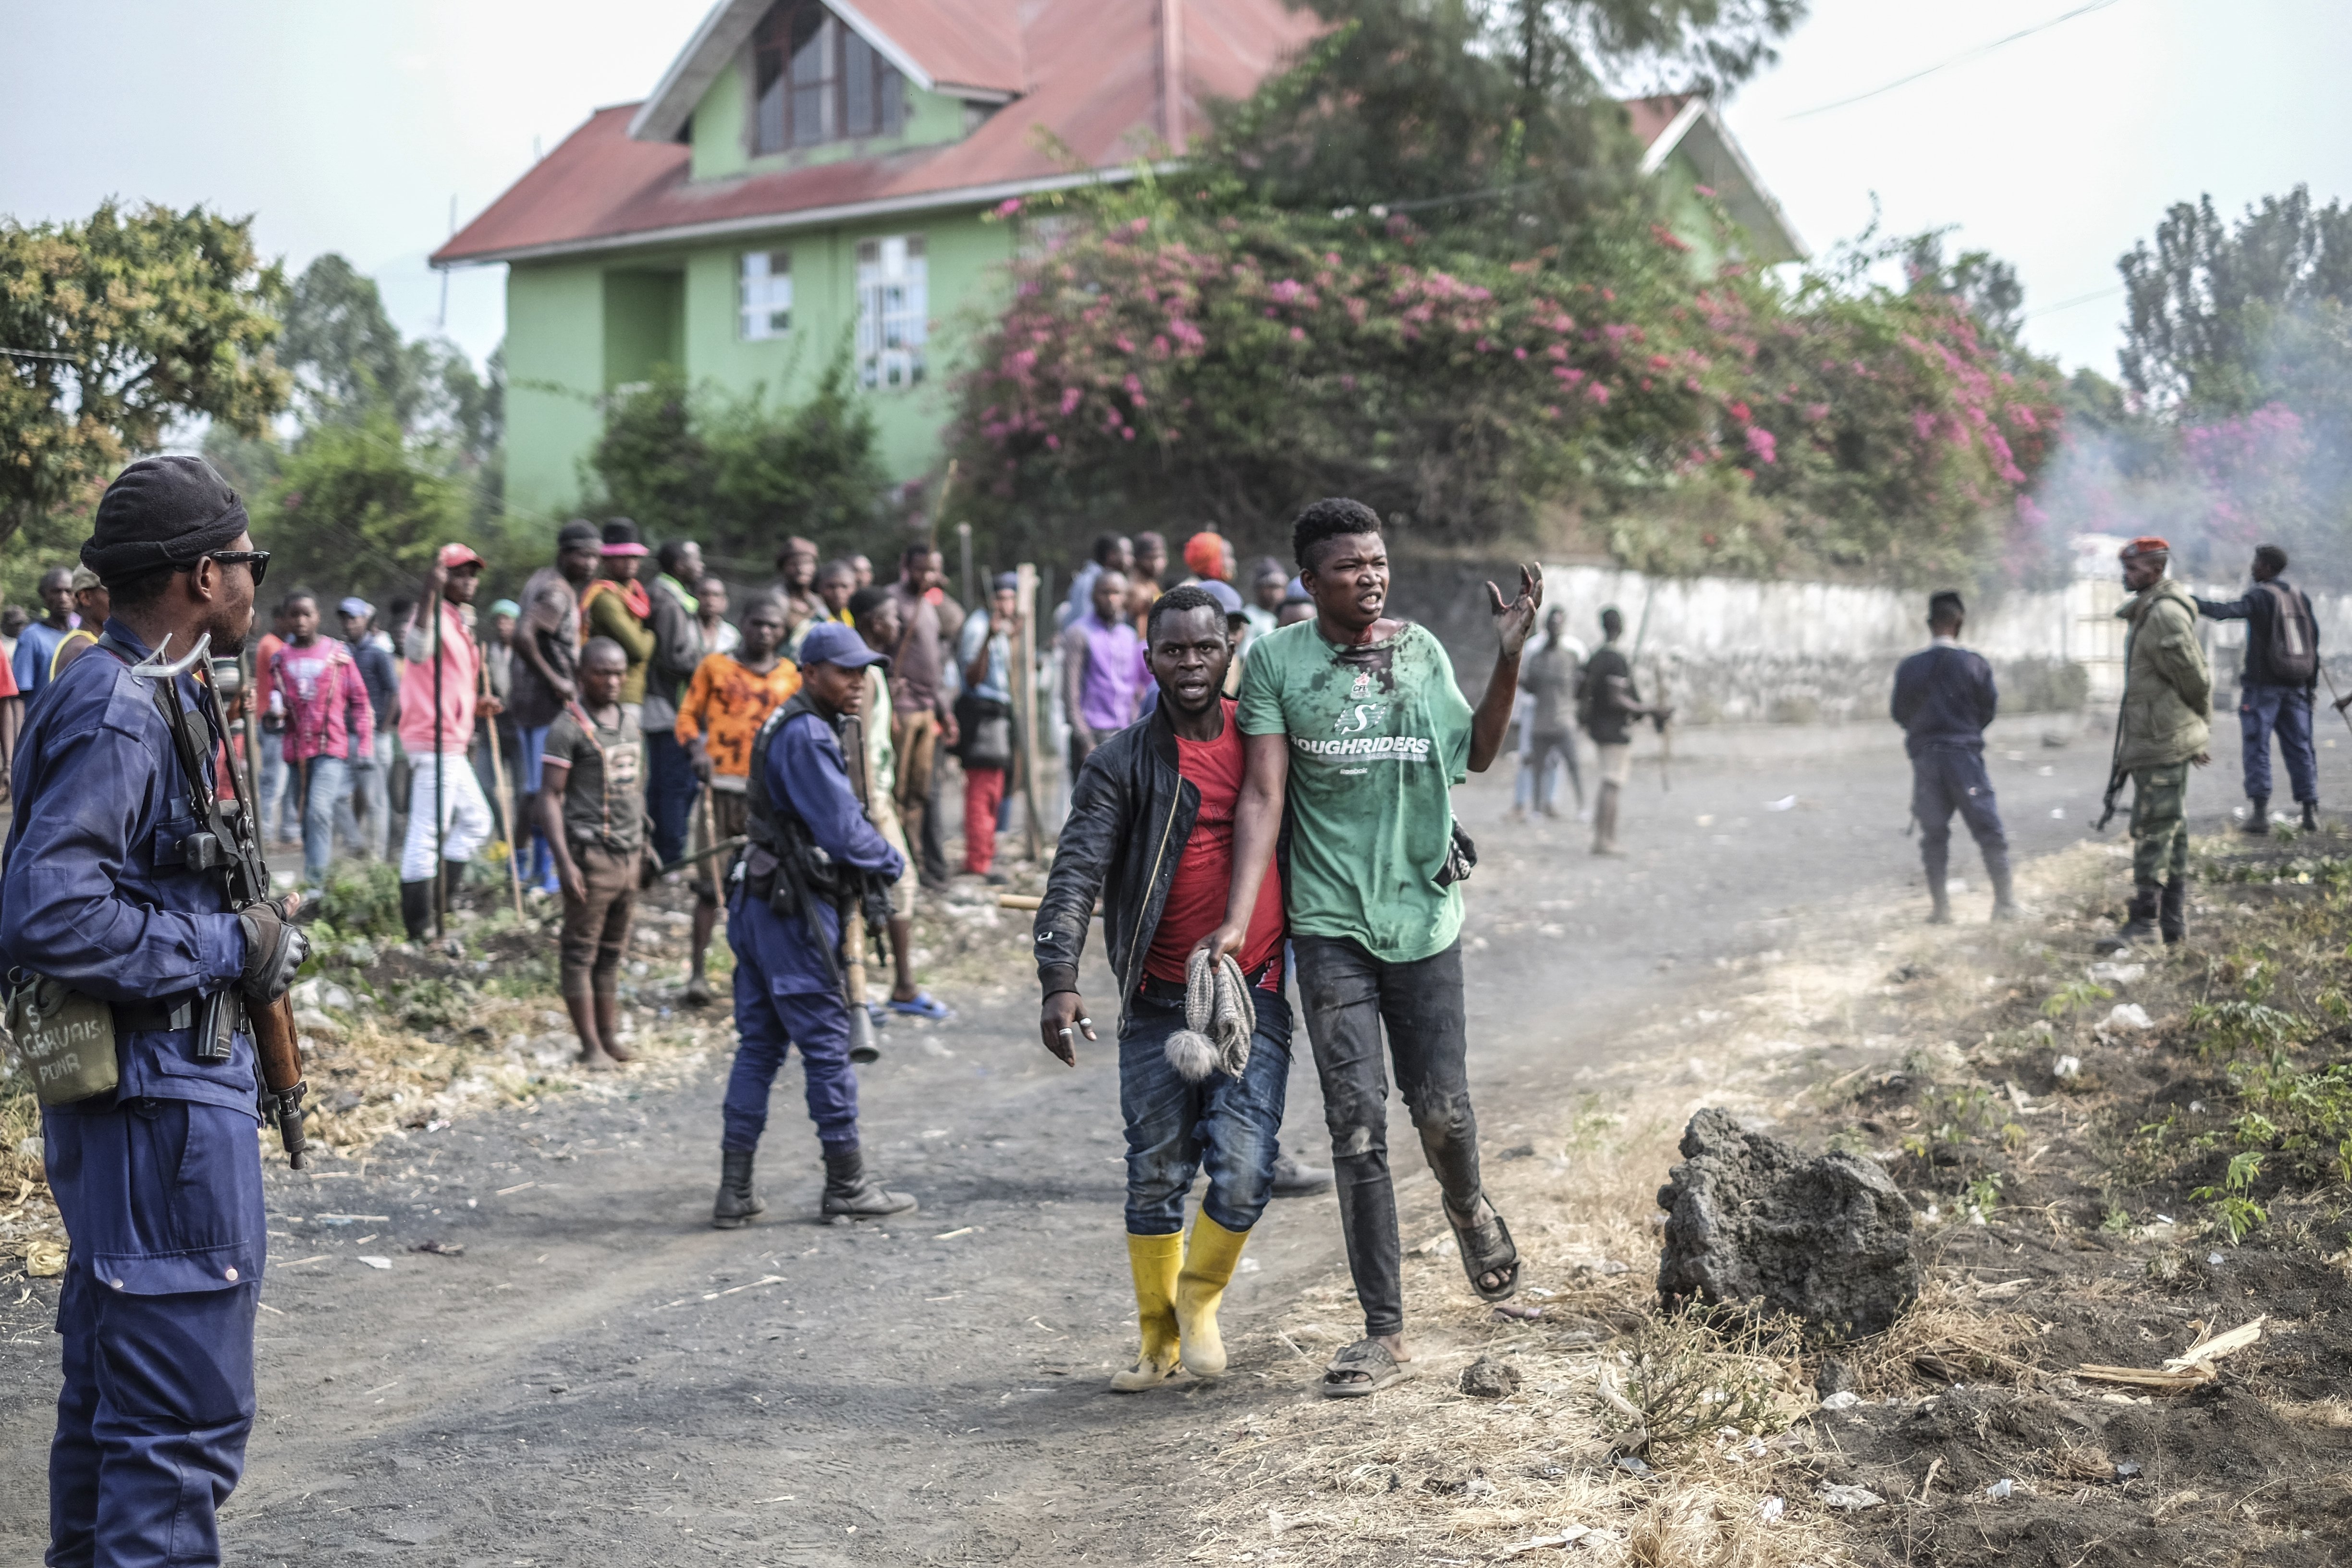 A wounded demonstrator walks past police officers during a protest against the United Nations peacekeeping force (MONUSCO) deployed in the Democratic Republic of the Congo in Sake, some 15 miles (24 kms) west of Goma, July 27, 2022. (AP Photo)